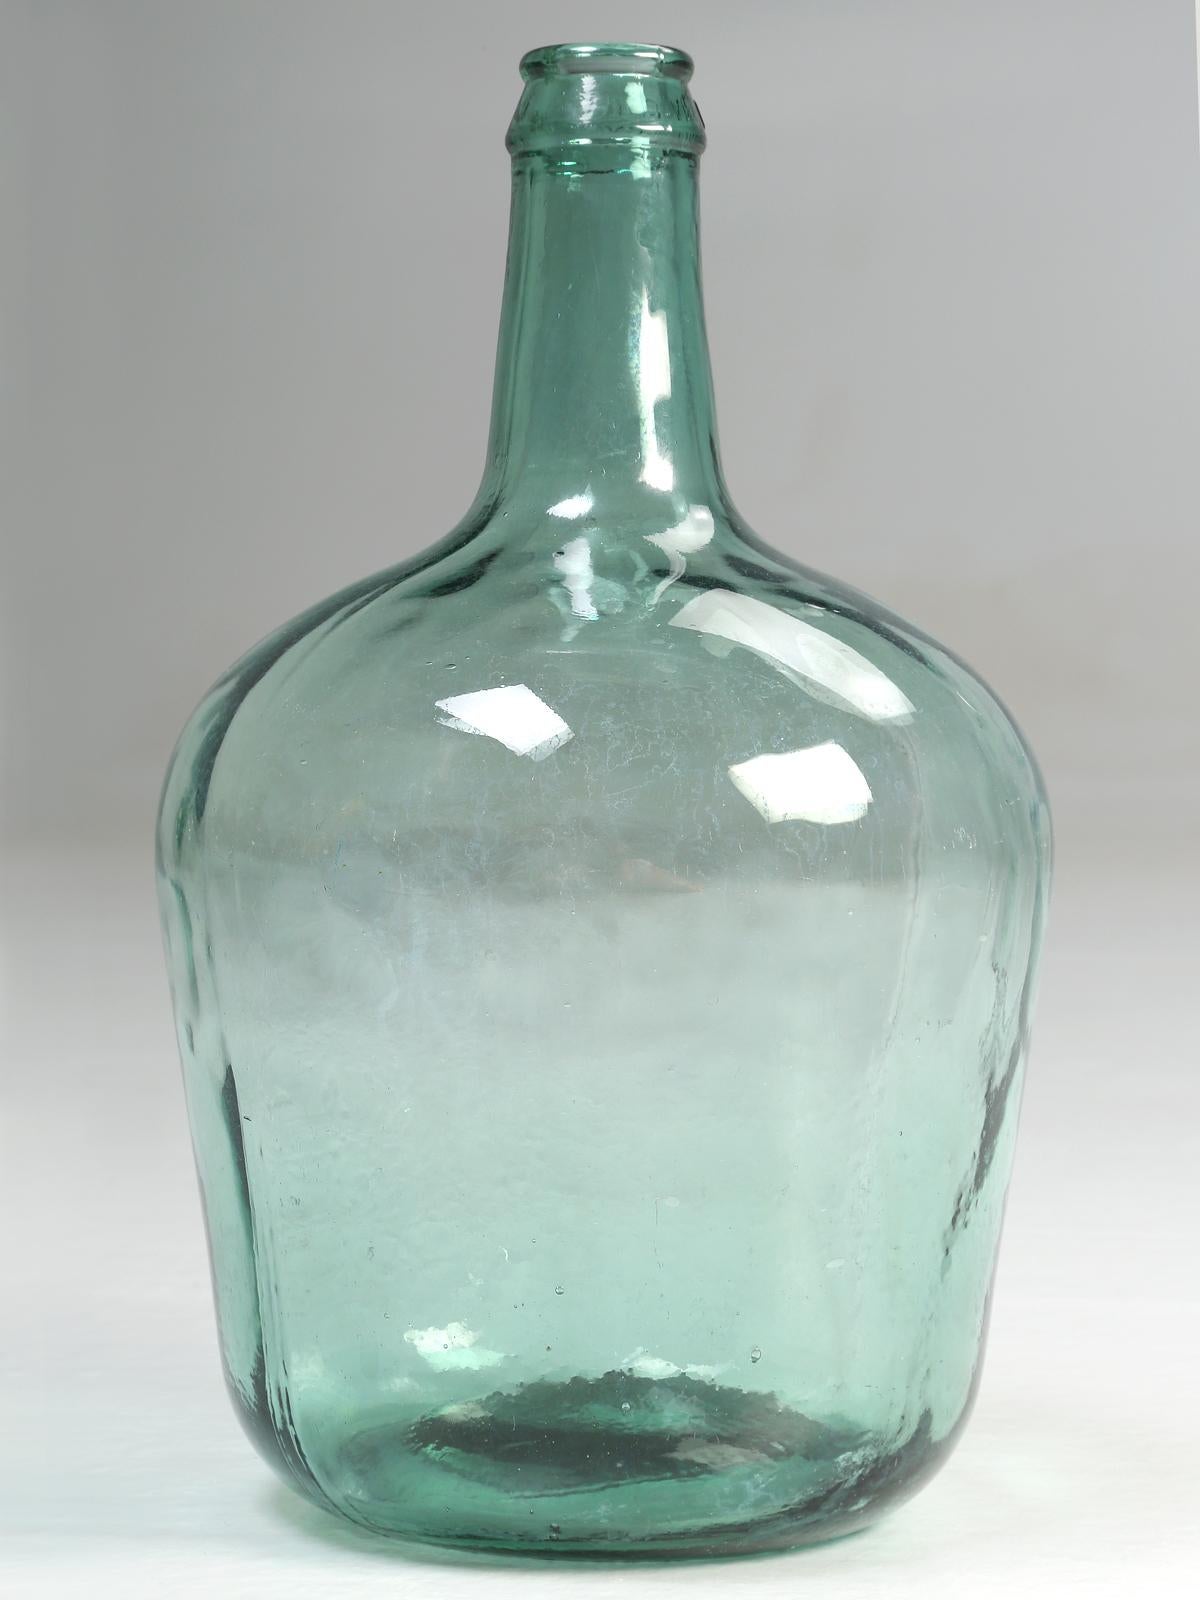 Demijohn and carboy were often used to describe the same glass bottle. The difference seems to be more of its function than form. Carboys were used to transport strong chemicals, while Demijohns were used for non-corrosive fluids. 
The top, around